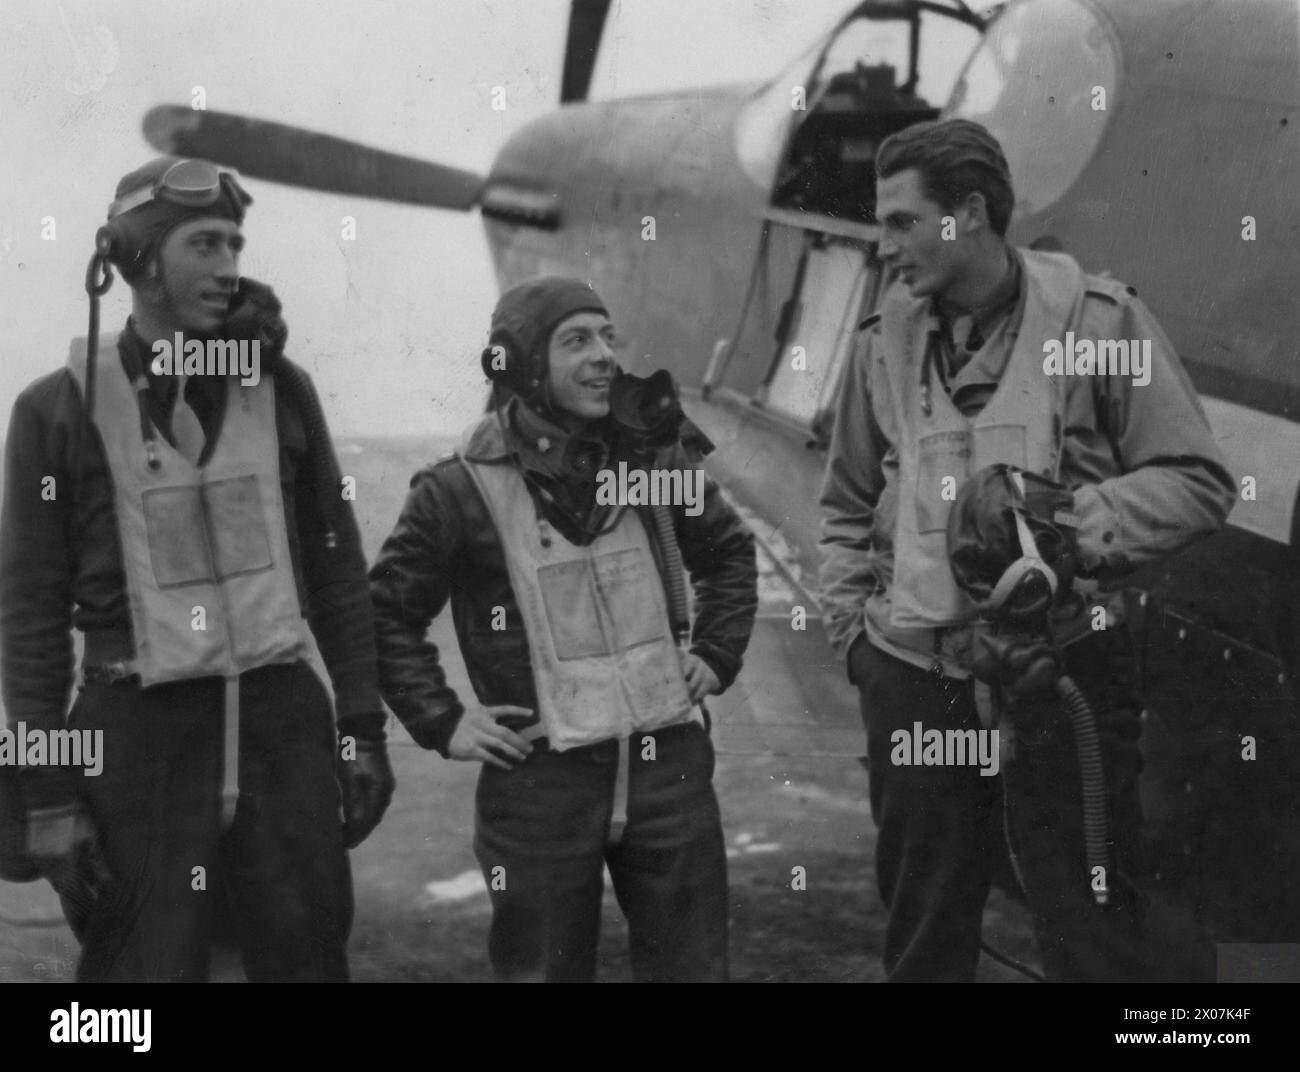 UNITED STATES NINTH AIR FORCE IN BRITAIN, 1942-1945 - Squadron Commanders of the 354th Fighter Group, Major James H Howard, Major George R Bickell and Major Owen M Seaman, with a P-51 Mustang.Image stamped on reverse: 'Associated Press.' [stamp], 'Passed for publication 13 Jan 1944.' [stamp] and '296905.' [Censor no.]Printed caption on reverse: 'THE P-51B- WORLD'S FASTEST FIGHTER PLANE. Associated Press photo shows: The three Squadron Commanders of the group. Left to right: Major James H Howard, aged 30, of 30 Crestwood Drive, St Louis, MO; Major George R Bickell, aged 27, of [obscured] Nutten Stock Photo